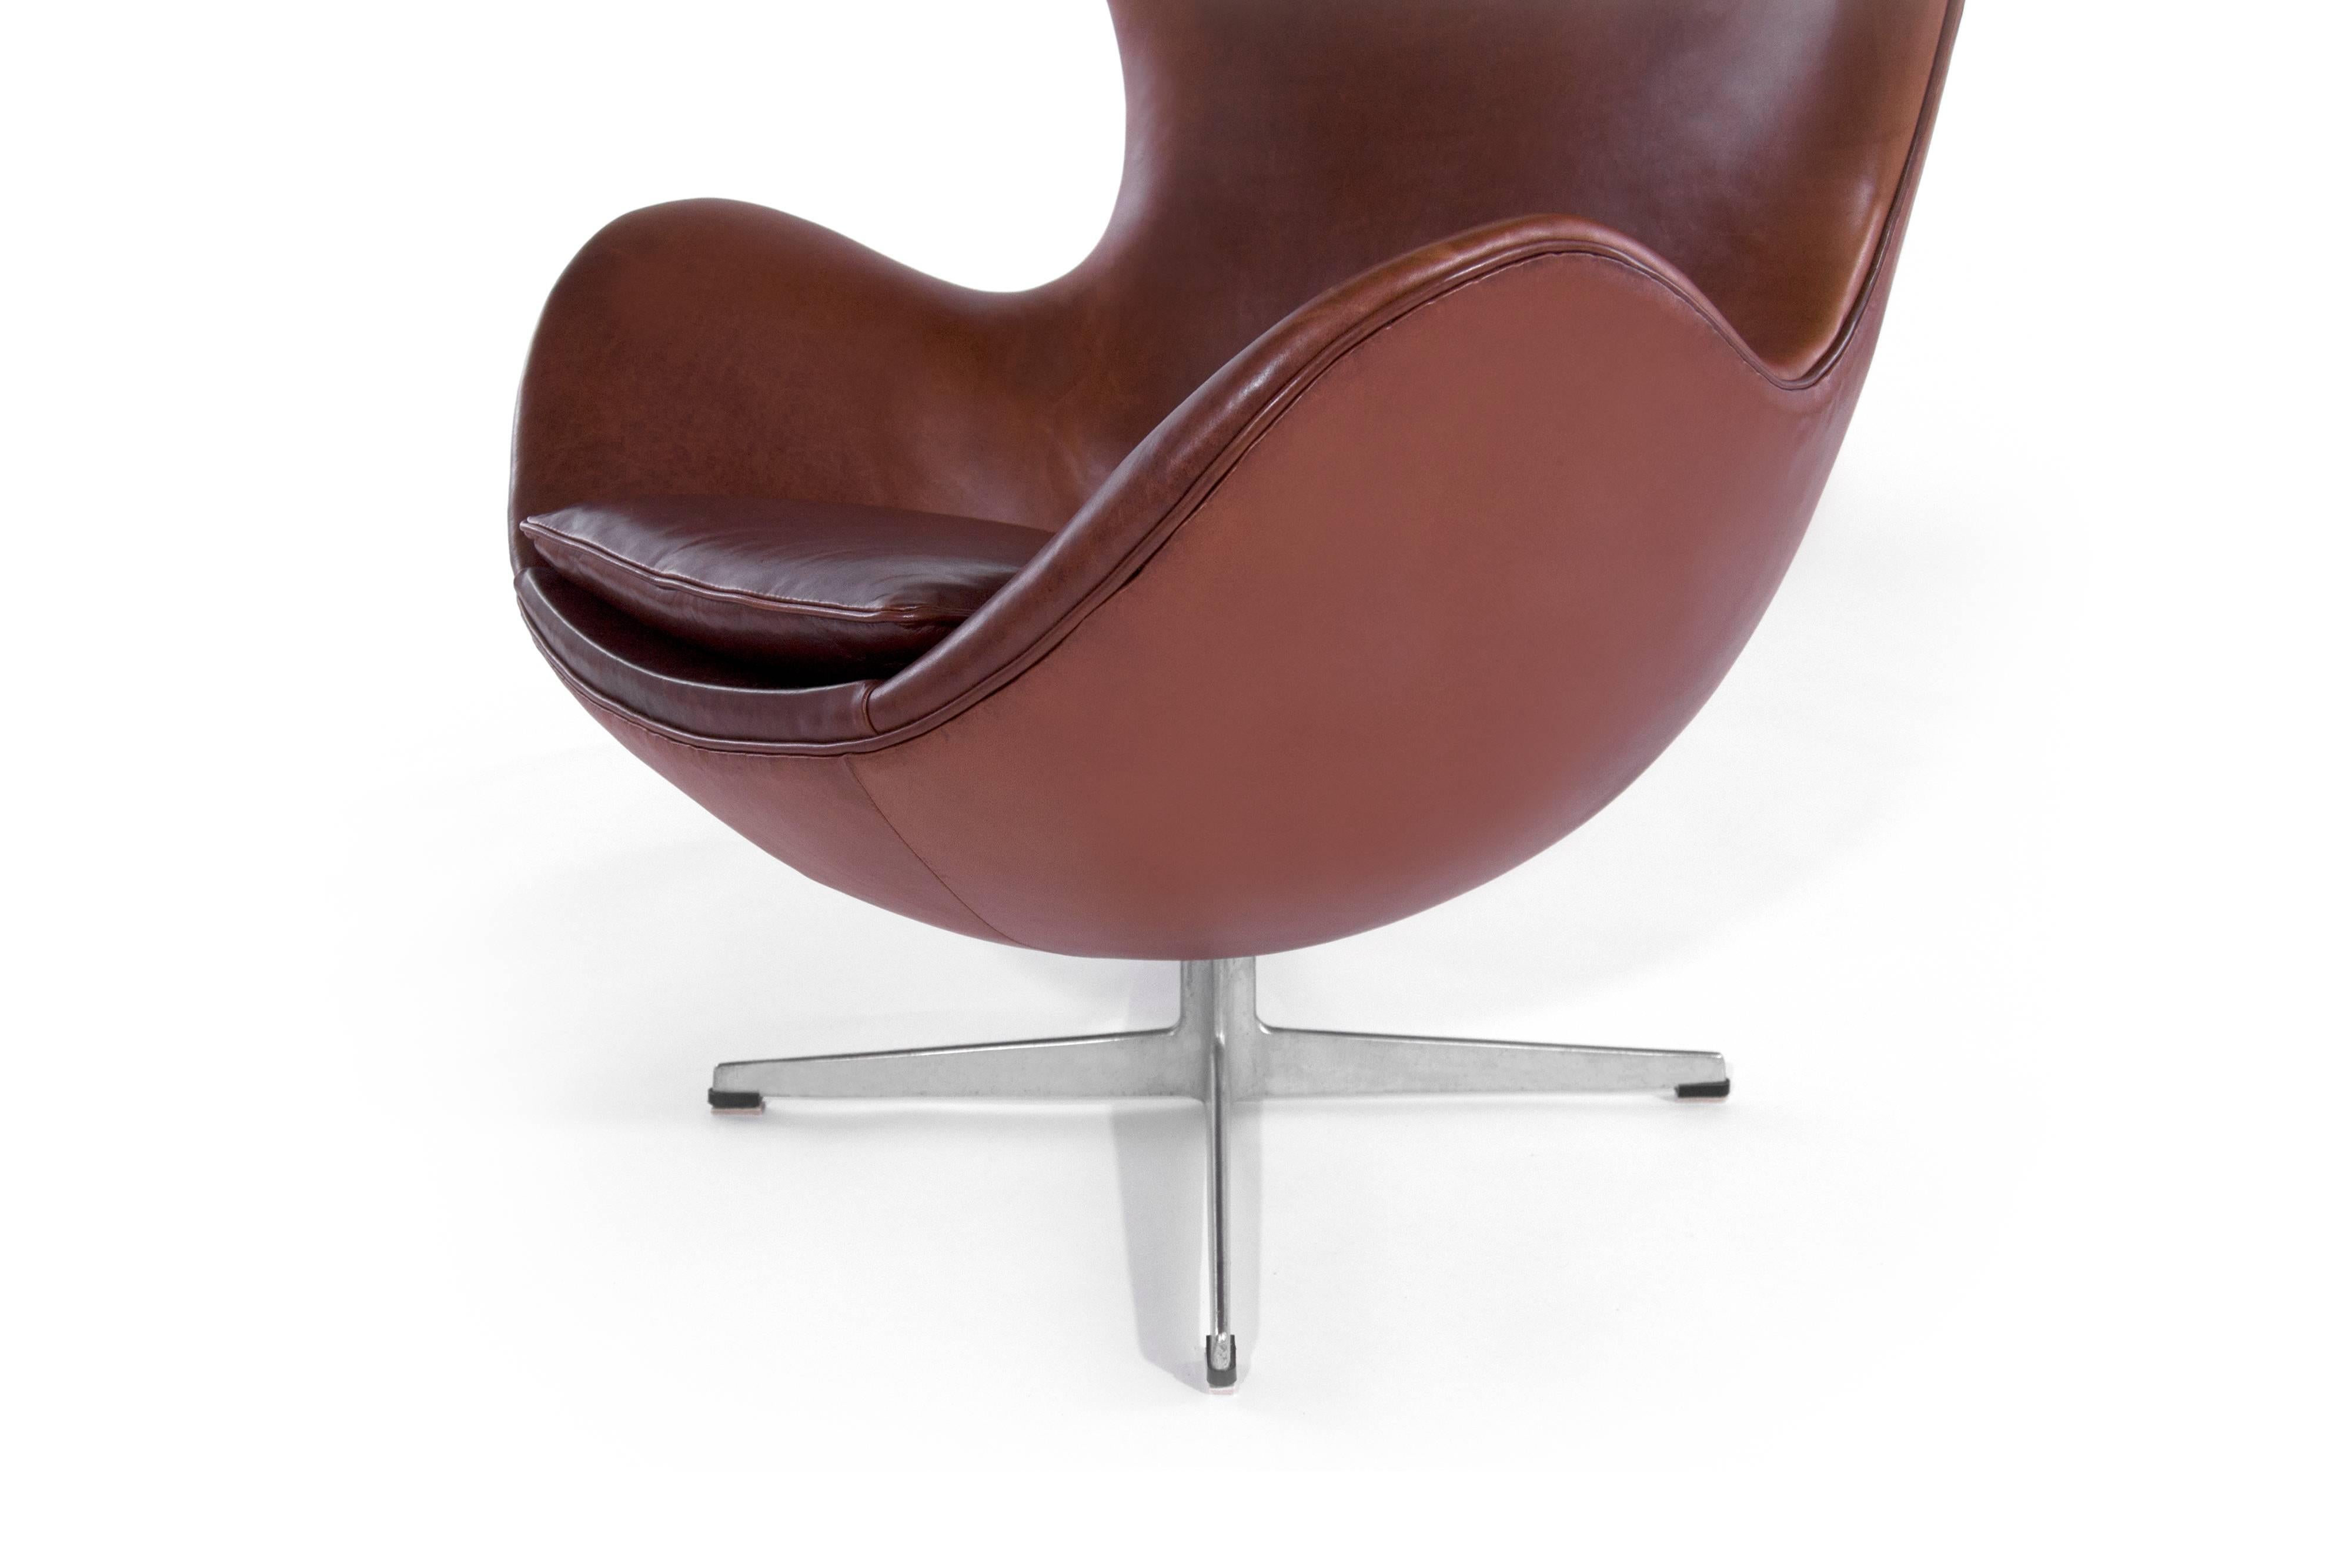 The Iconic Egg Chair, model 3316 and matching footstool model 3127, designed by Arne Jacobsen. Produced by Fritz Hansen in Denmark, 1965. Newly upholstered in chianti leather. Single chair and footstool available.

